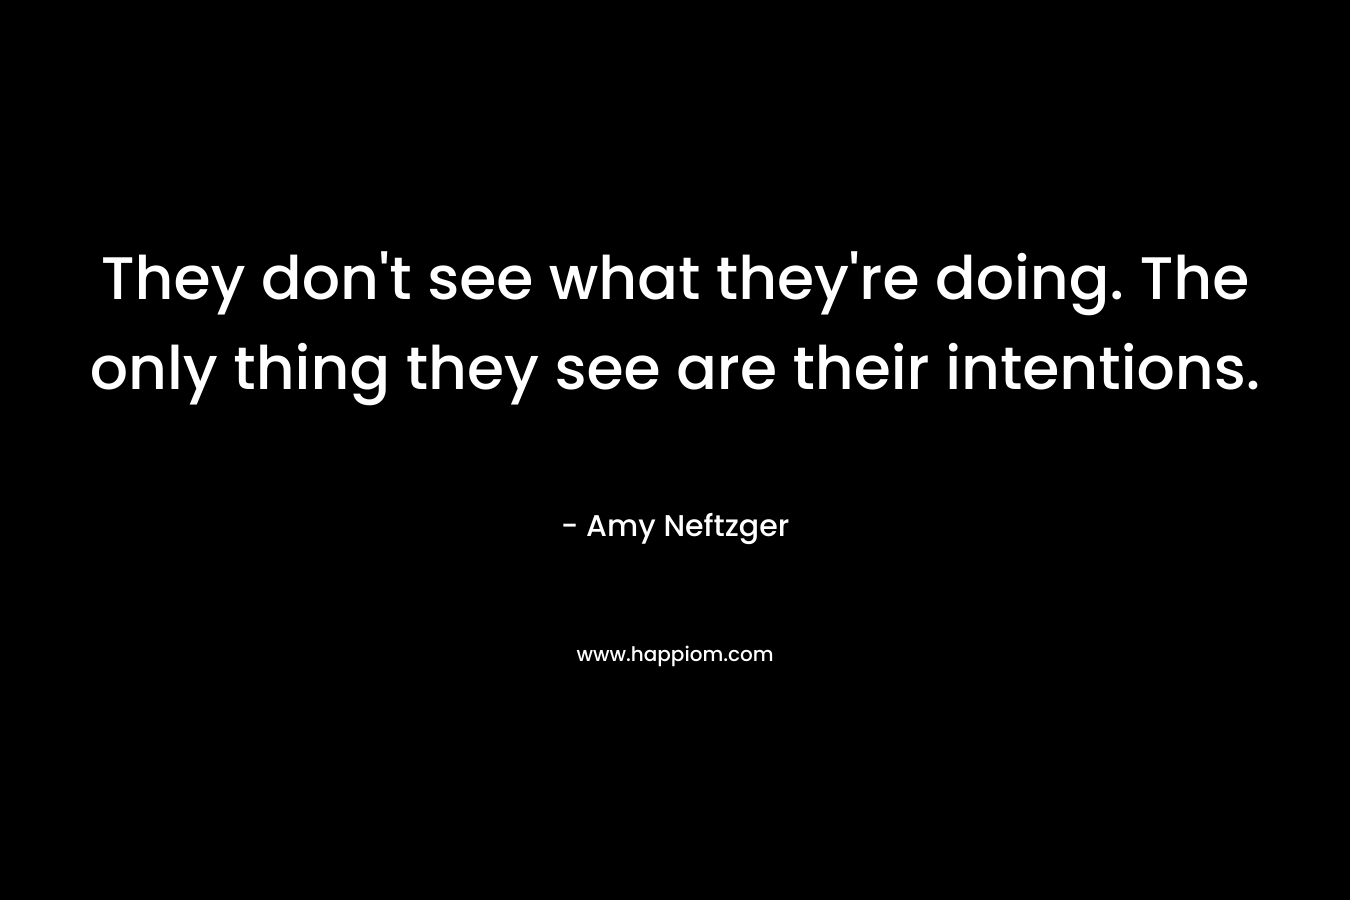 They don't see what they're doing. The only thing they see are their intentions.